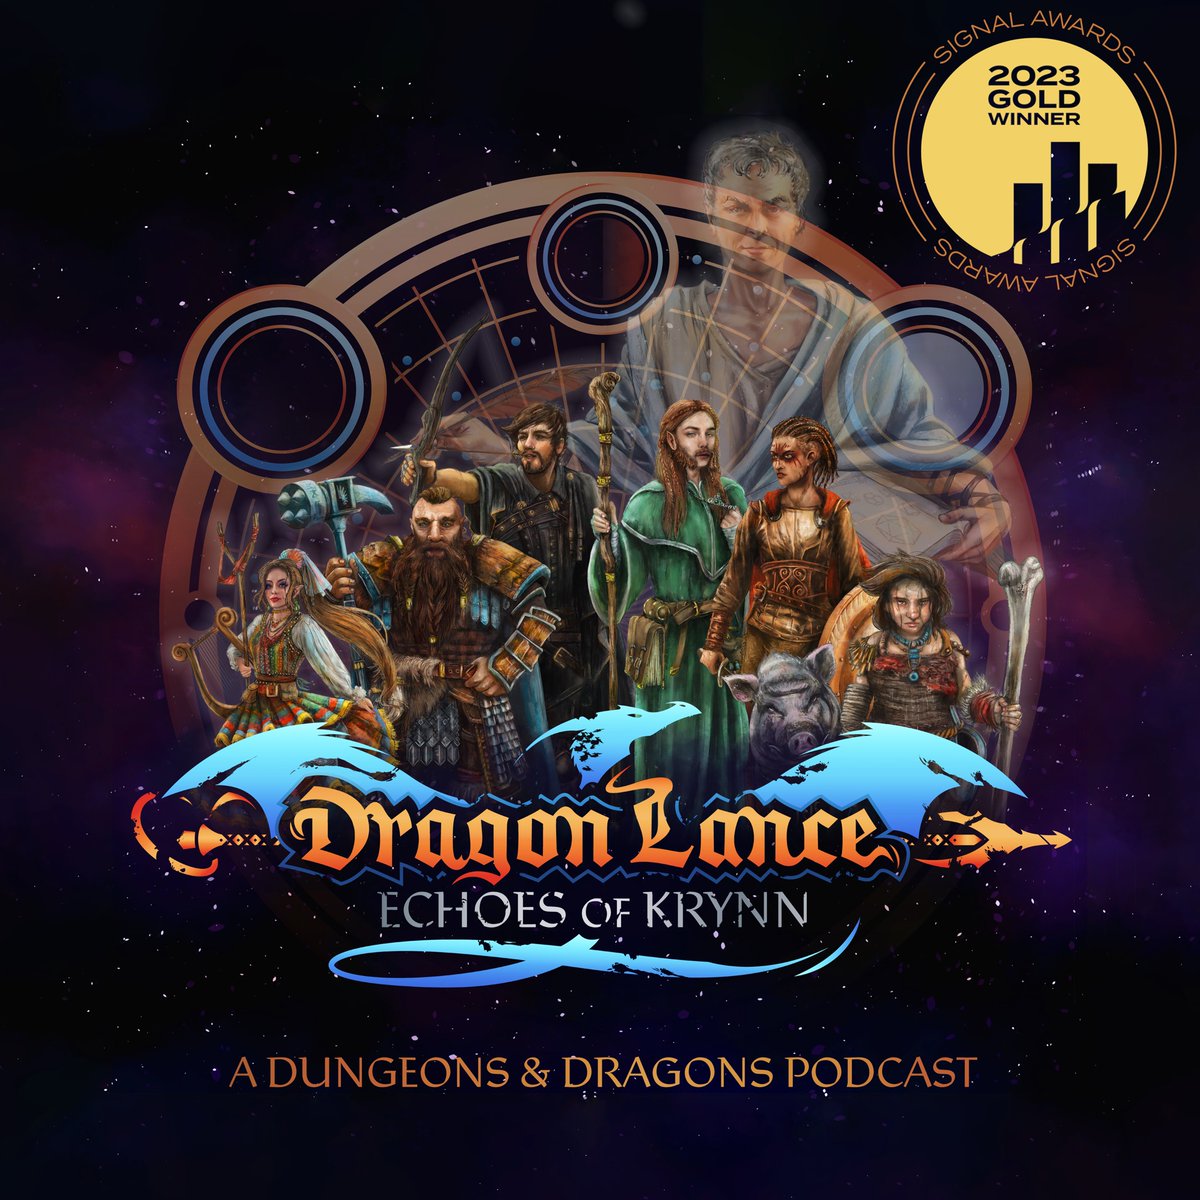 So excited to announce that our podcast, Dragonlance: @EchoesofKrynn, took Gold in the @signalawards for Gaming and Actual Play. Huge shout out to my amazing DM and fellow players. Signal Awards. @lawfulstupidrpg, #dungeonsanddragons #dragonlance #dnd5e @WeisMargaret